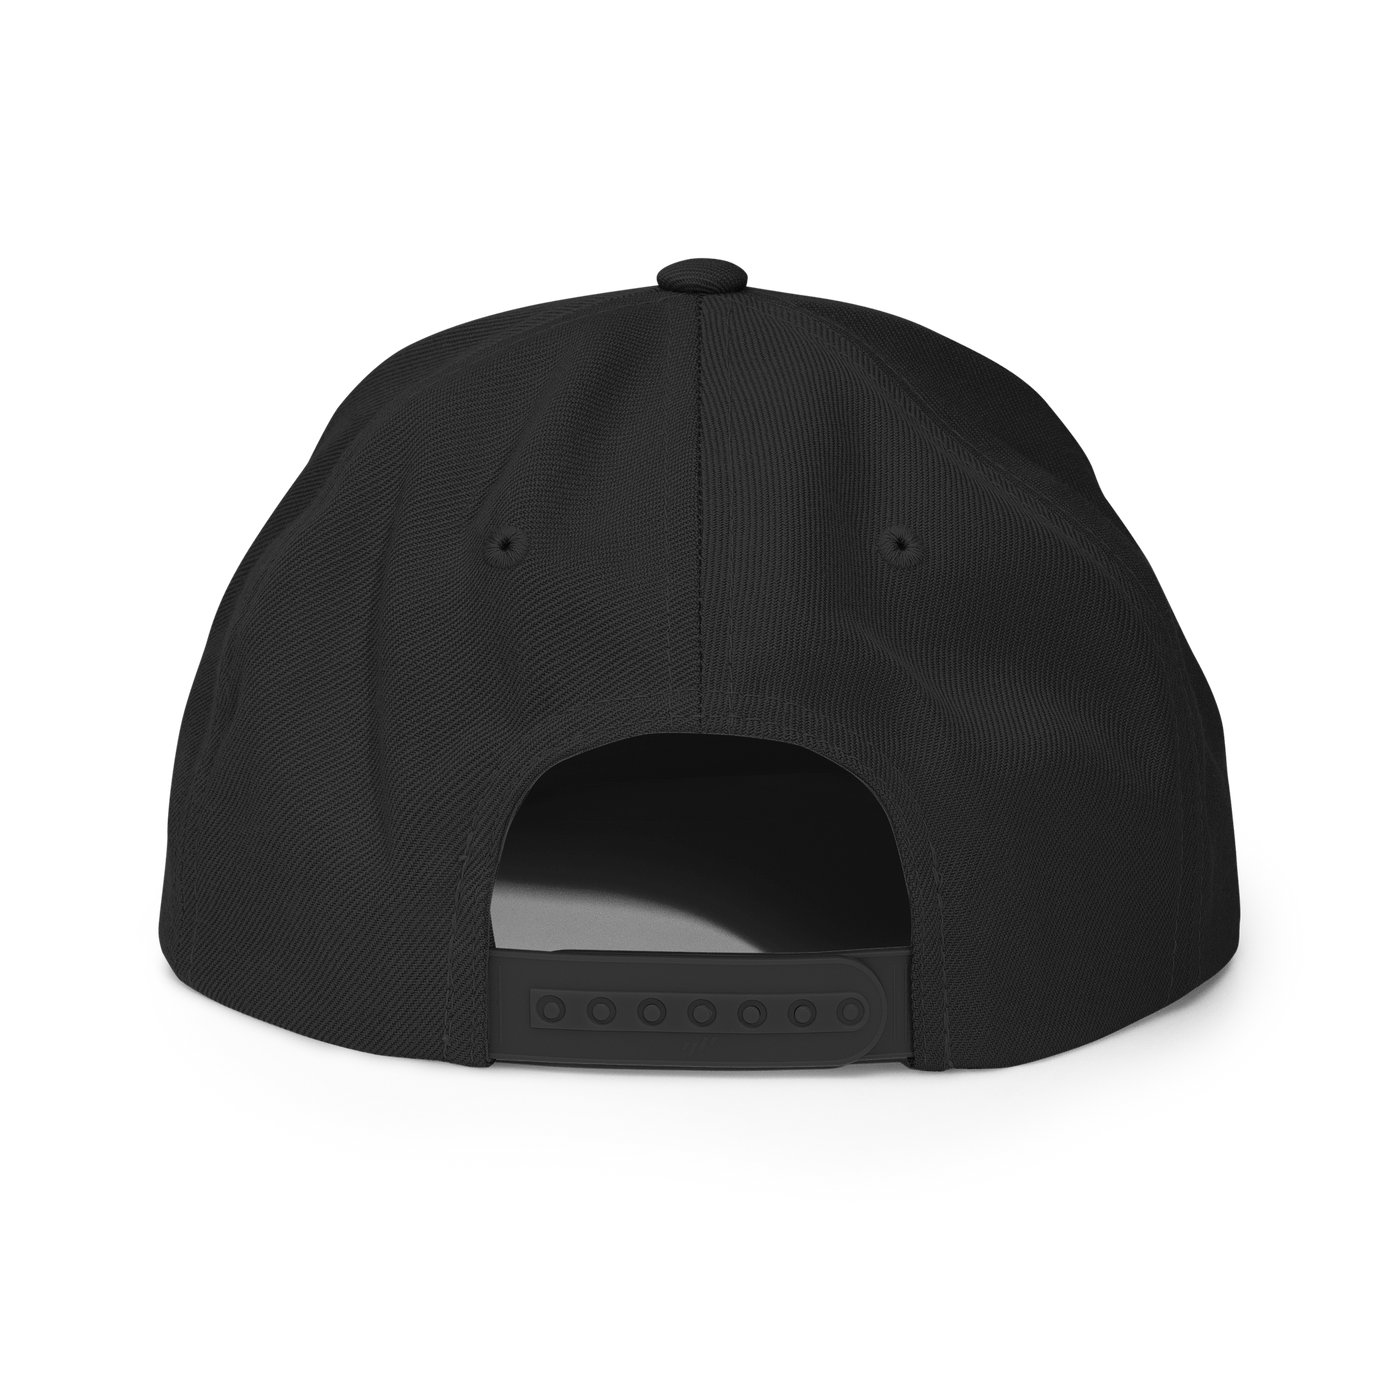 Humanity runs on coffee Snapback Hat - Black - - Just Another Cap Store